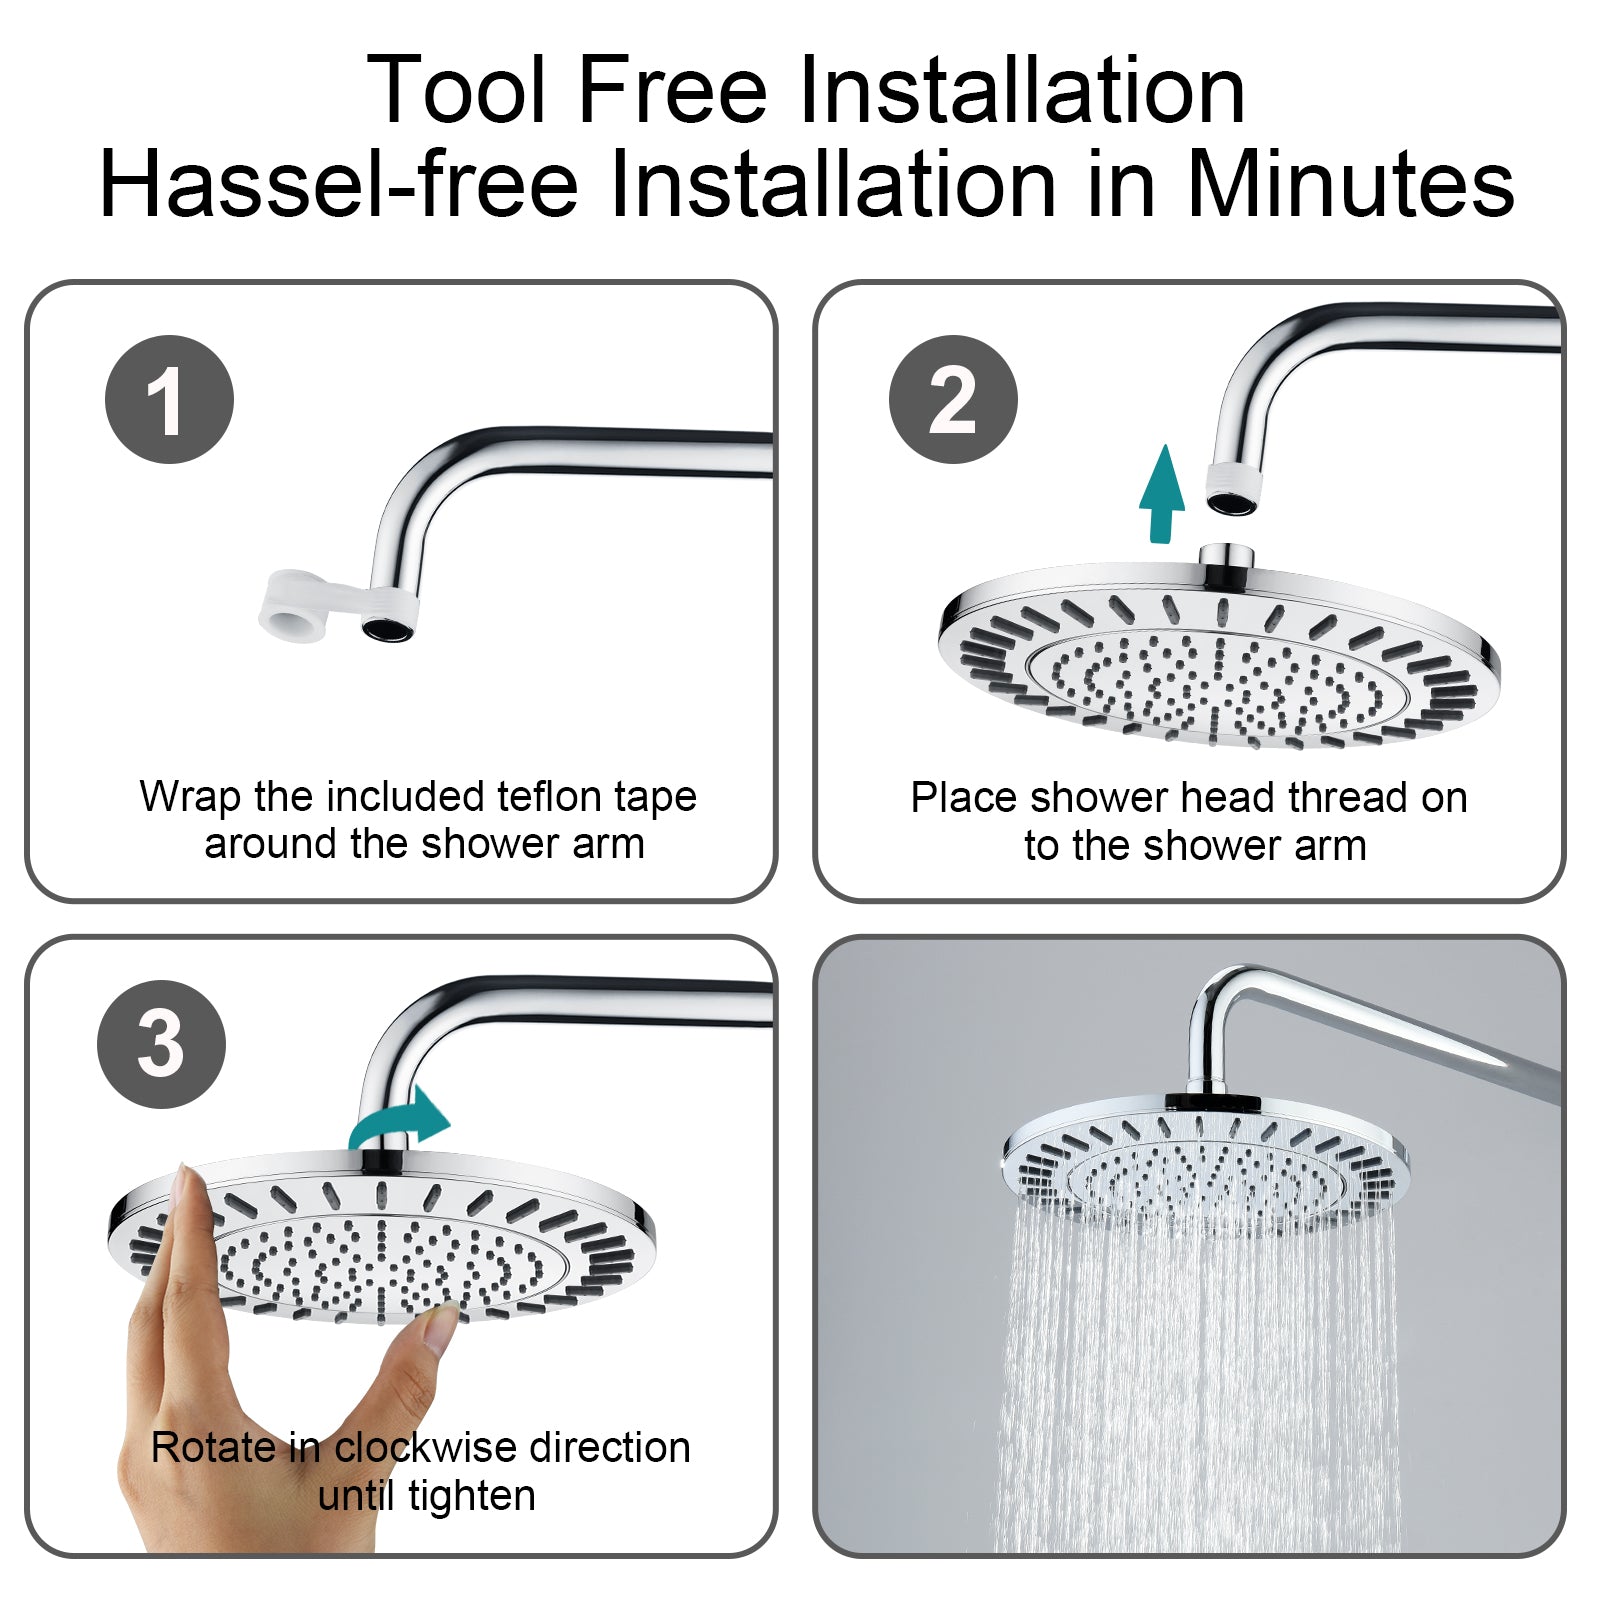 What to Know About Rain Shower Heads and Waterfall Showers